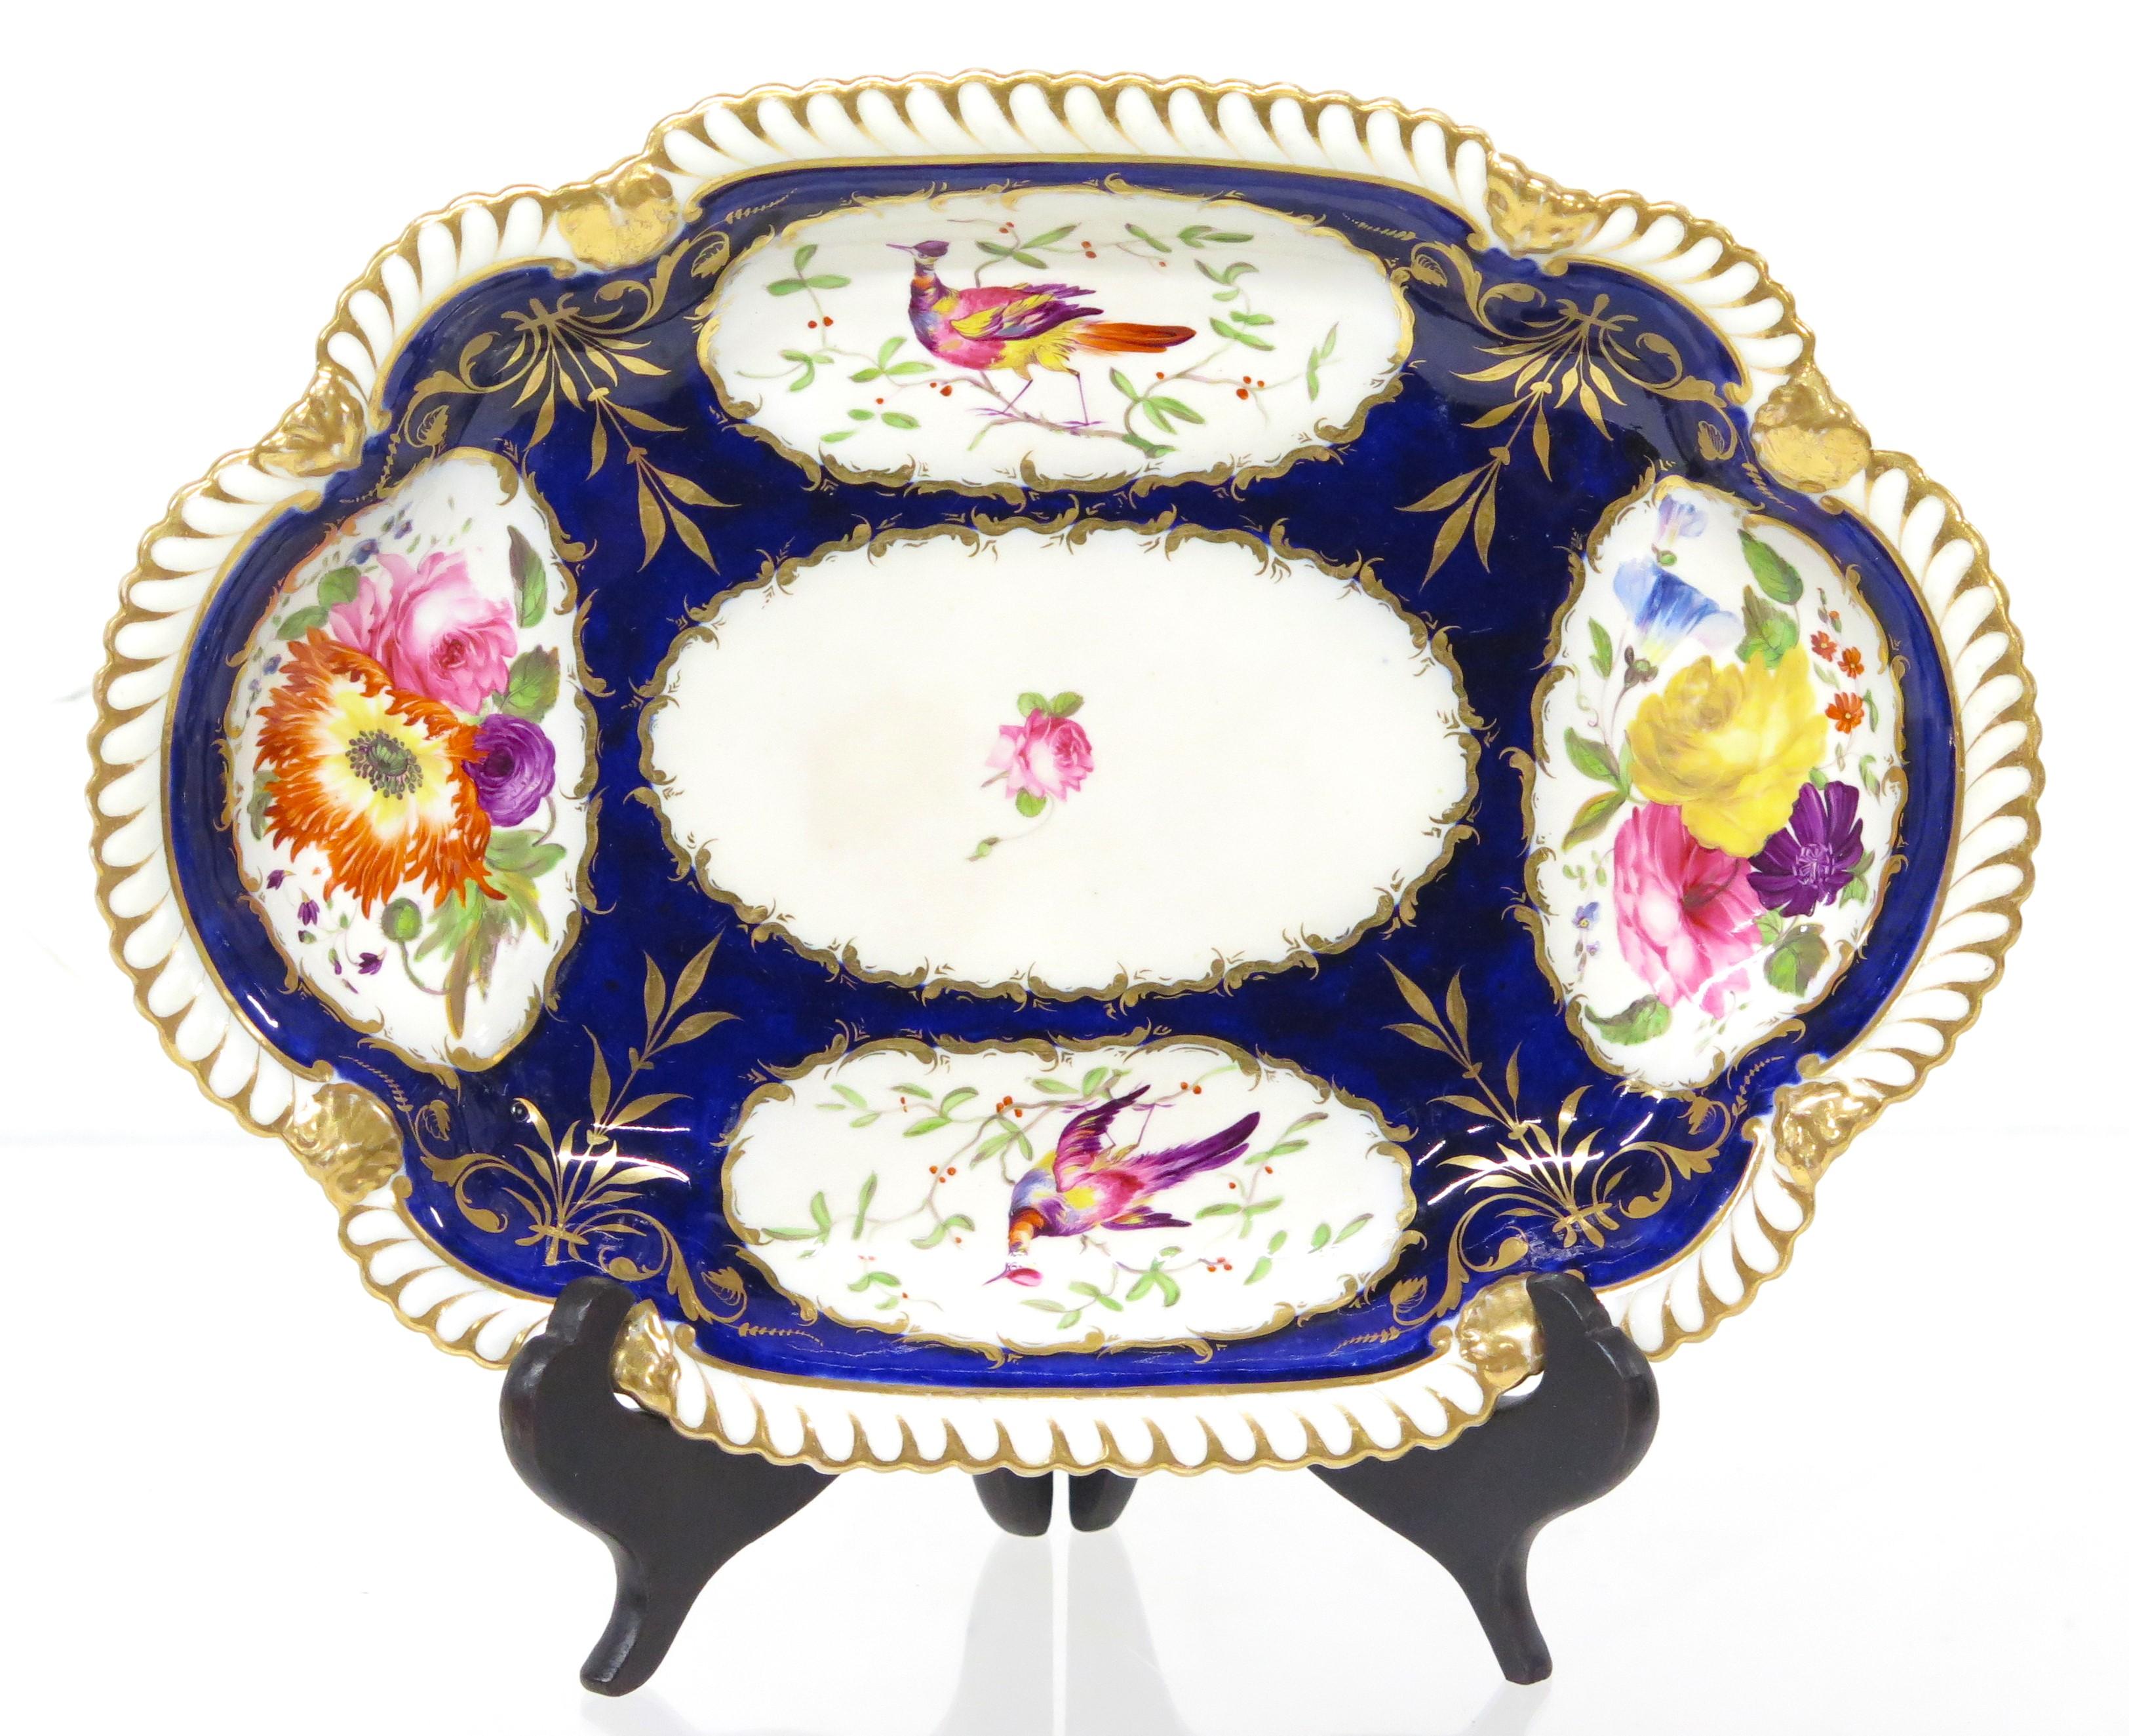 A Group of Royal Crown Derby-Style Cobalt & Floral Hand-Painted China For Sale 2